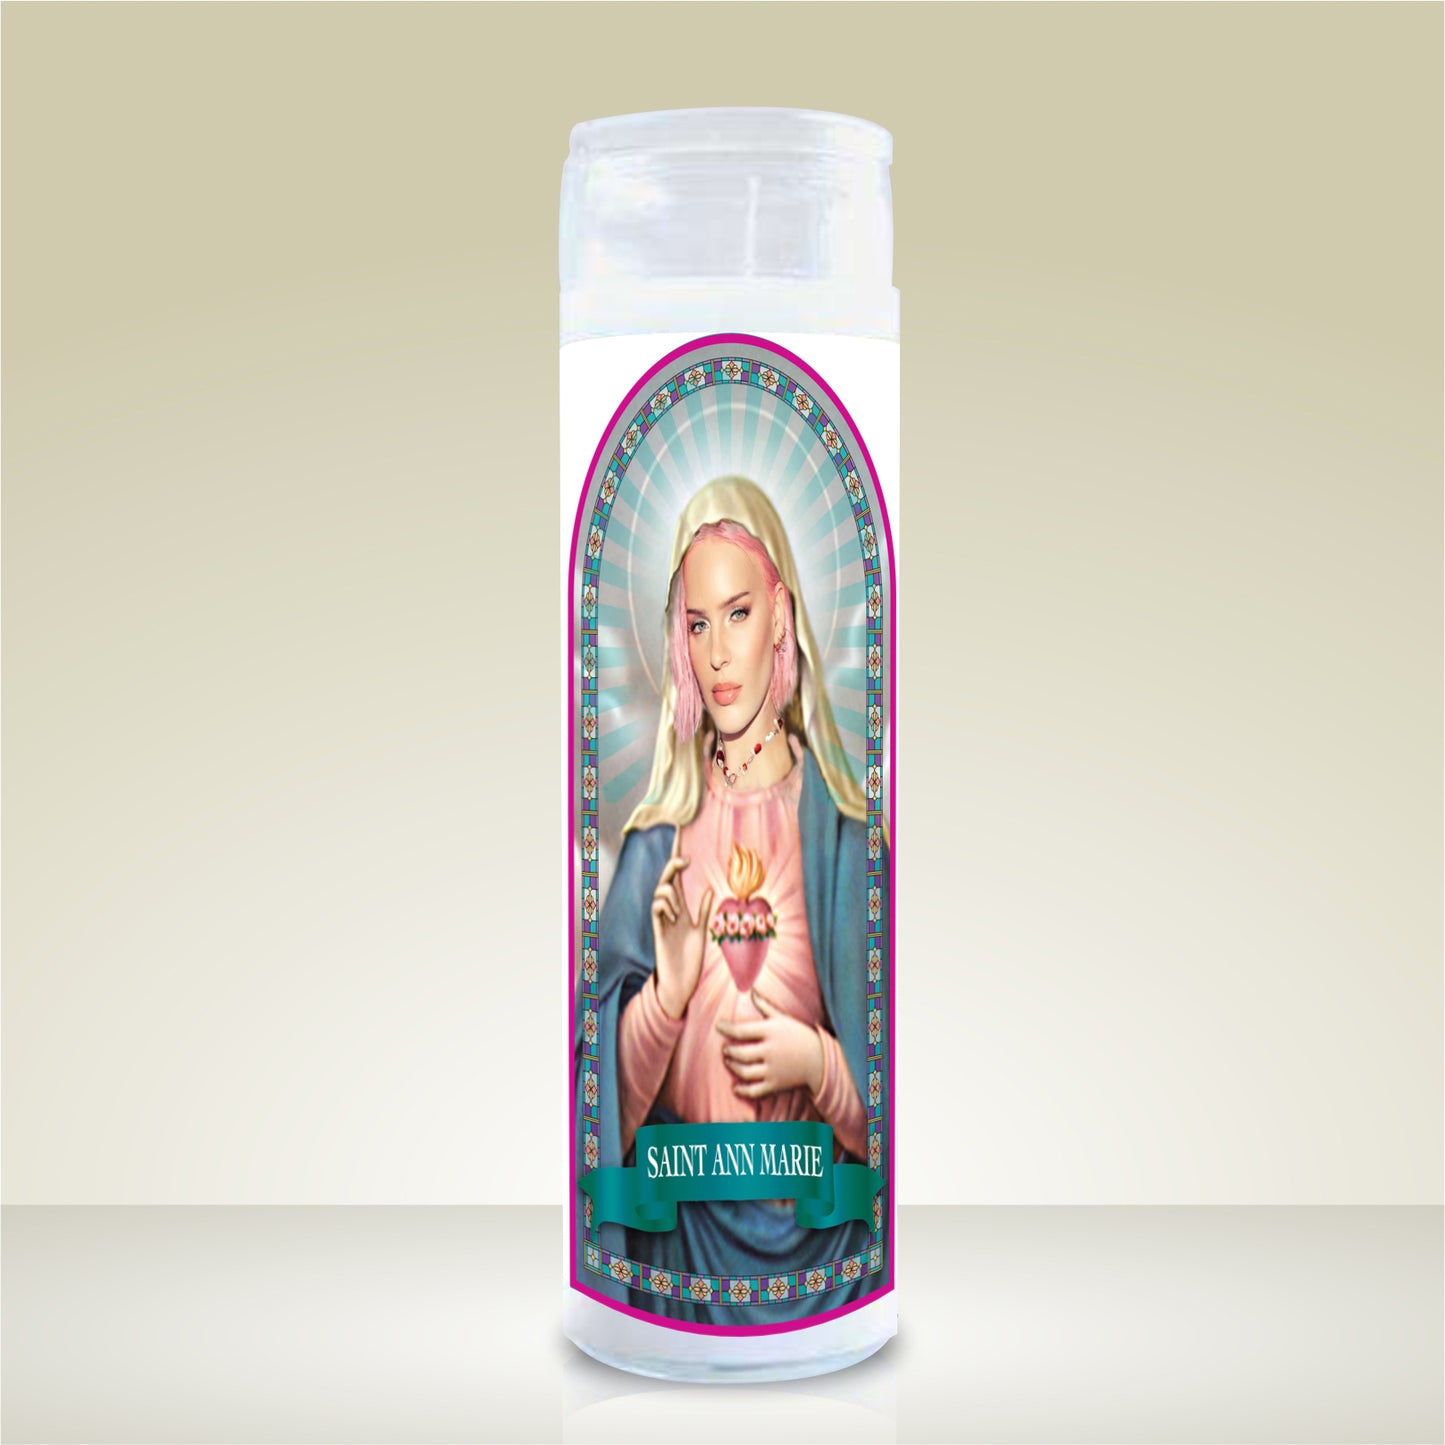 Anne Marie Celebrity Prayer Candle. Buy 1 Design, Get Another 1/2 Price